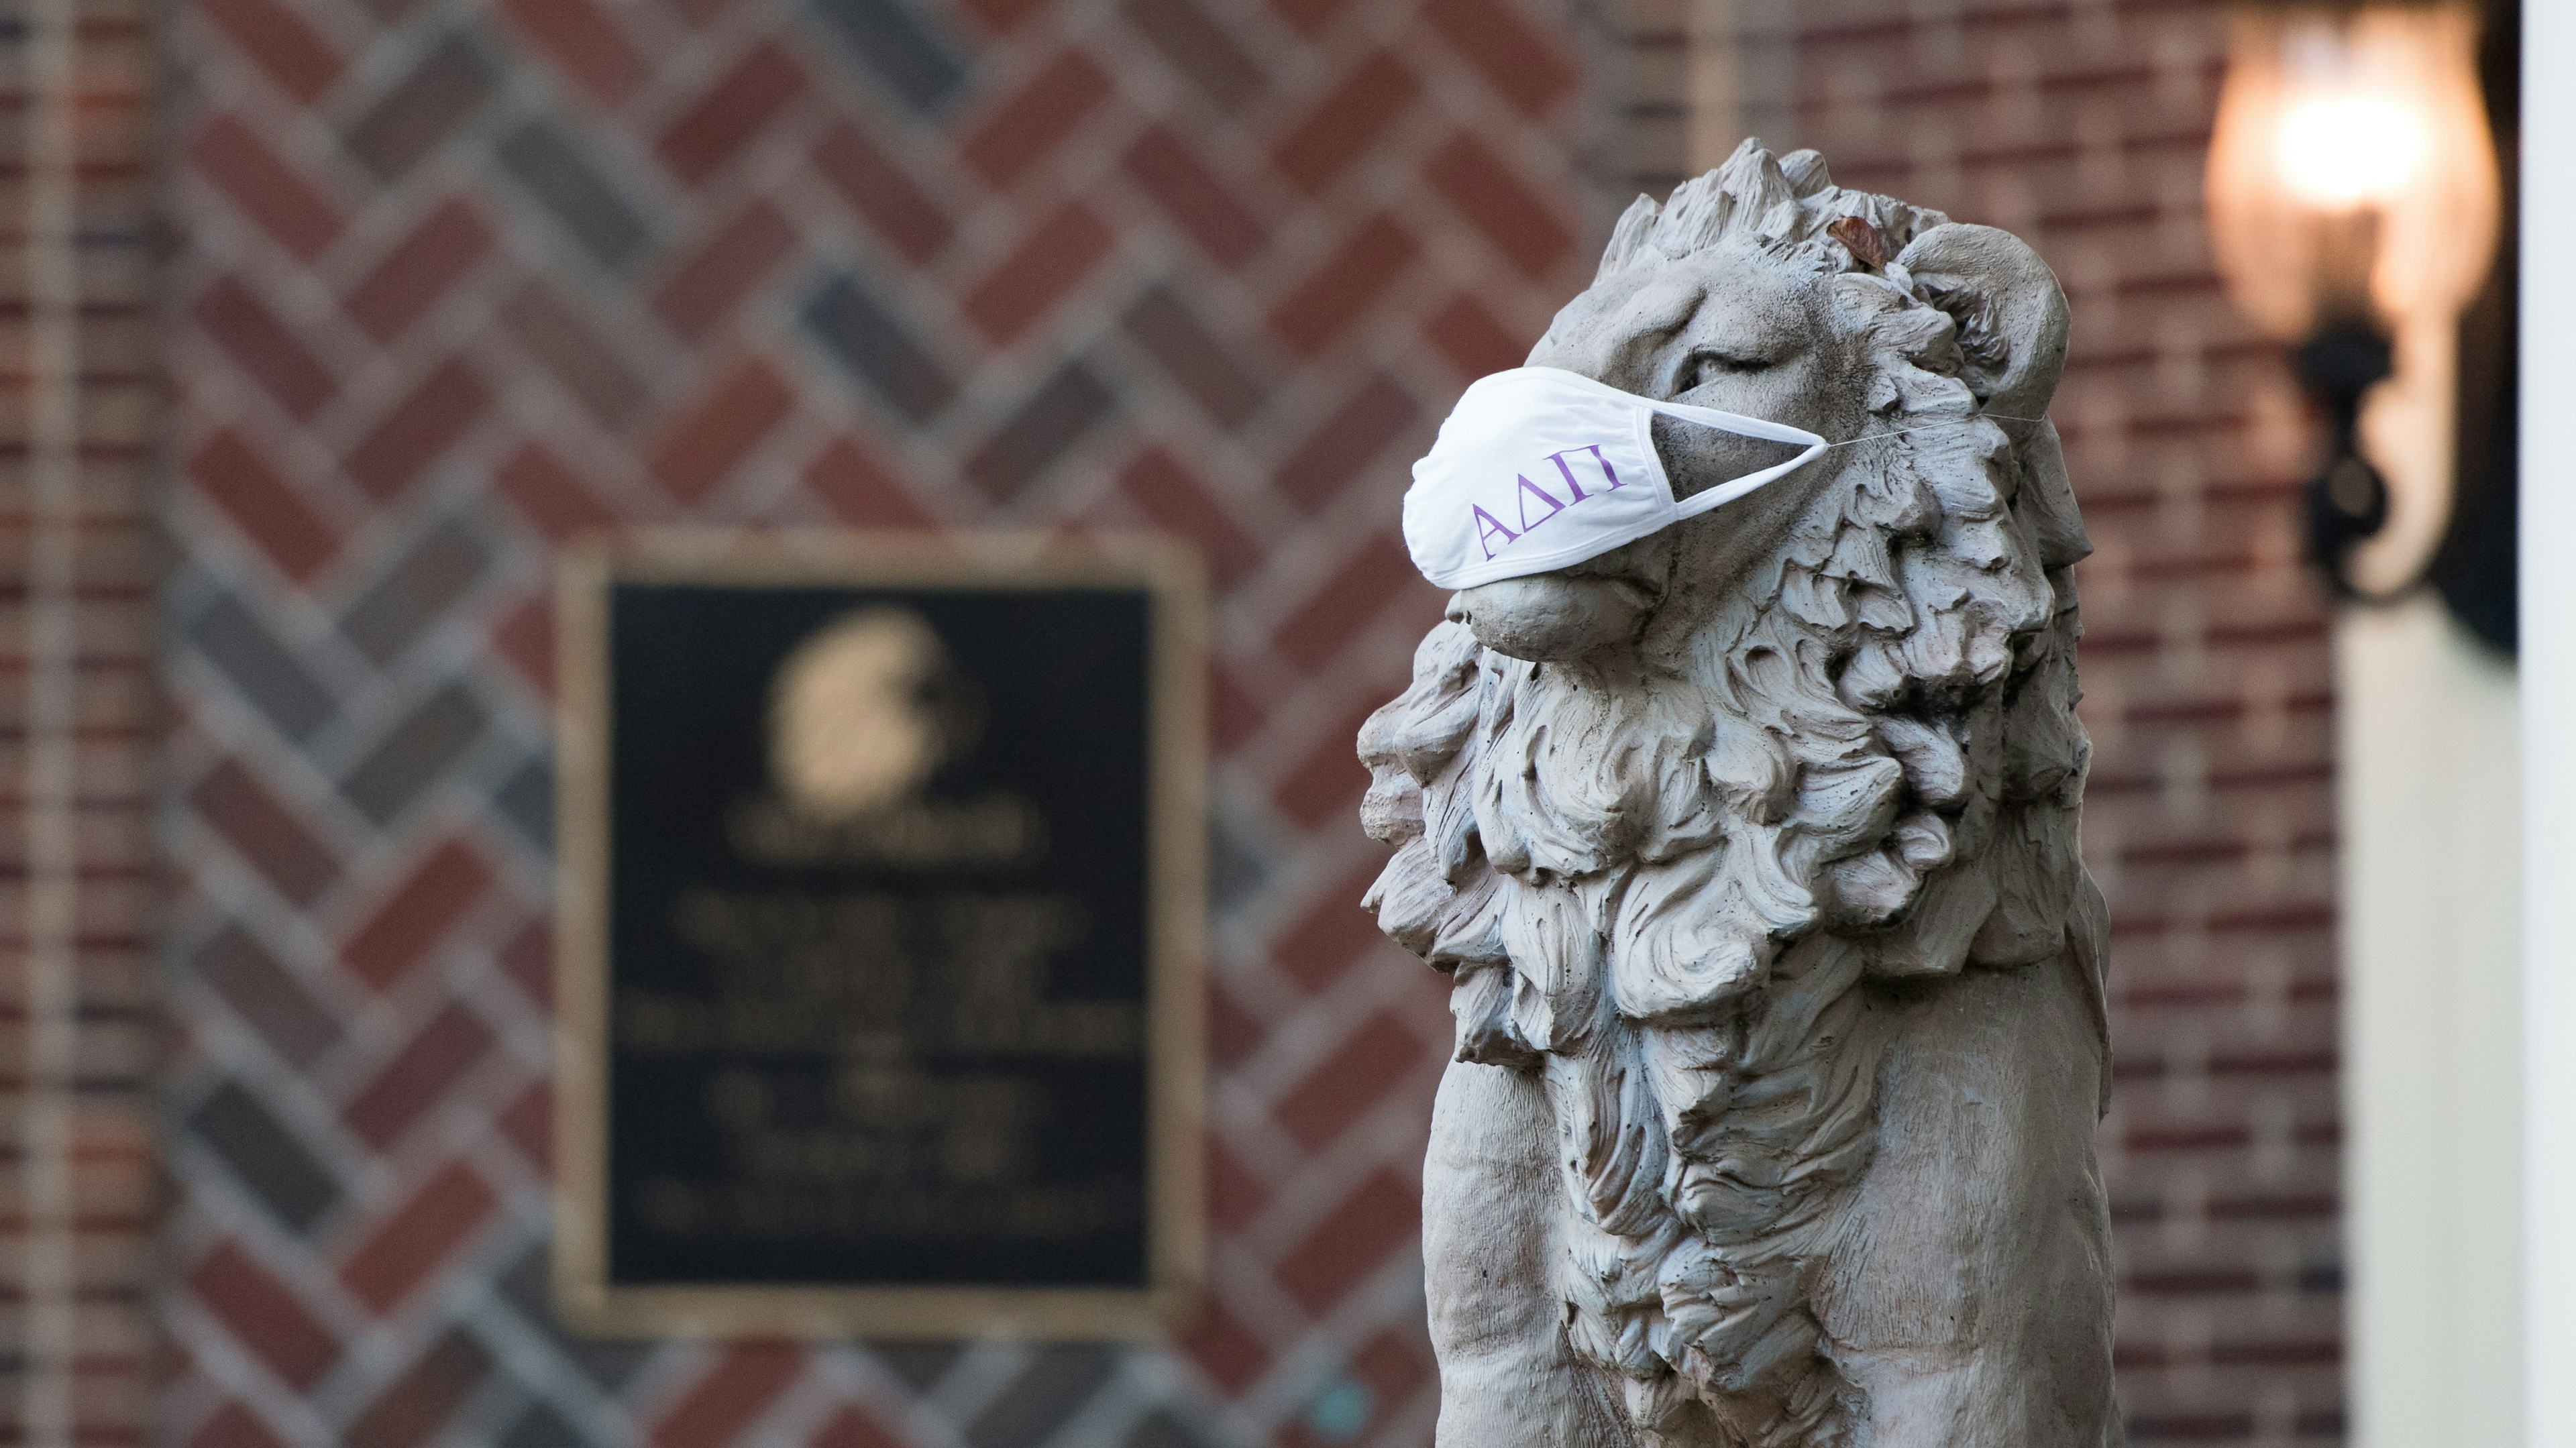 A mask adorns a statue of a lion in front of the Alpha Delta Pi sorority house on September 3, 2020 in Columbia, South Carolina.